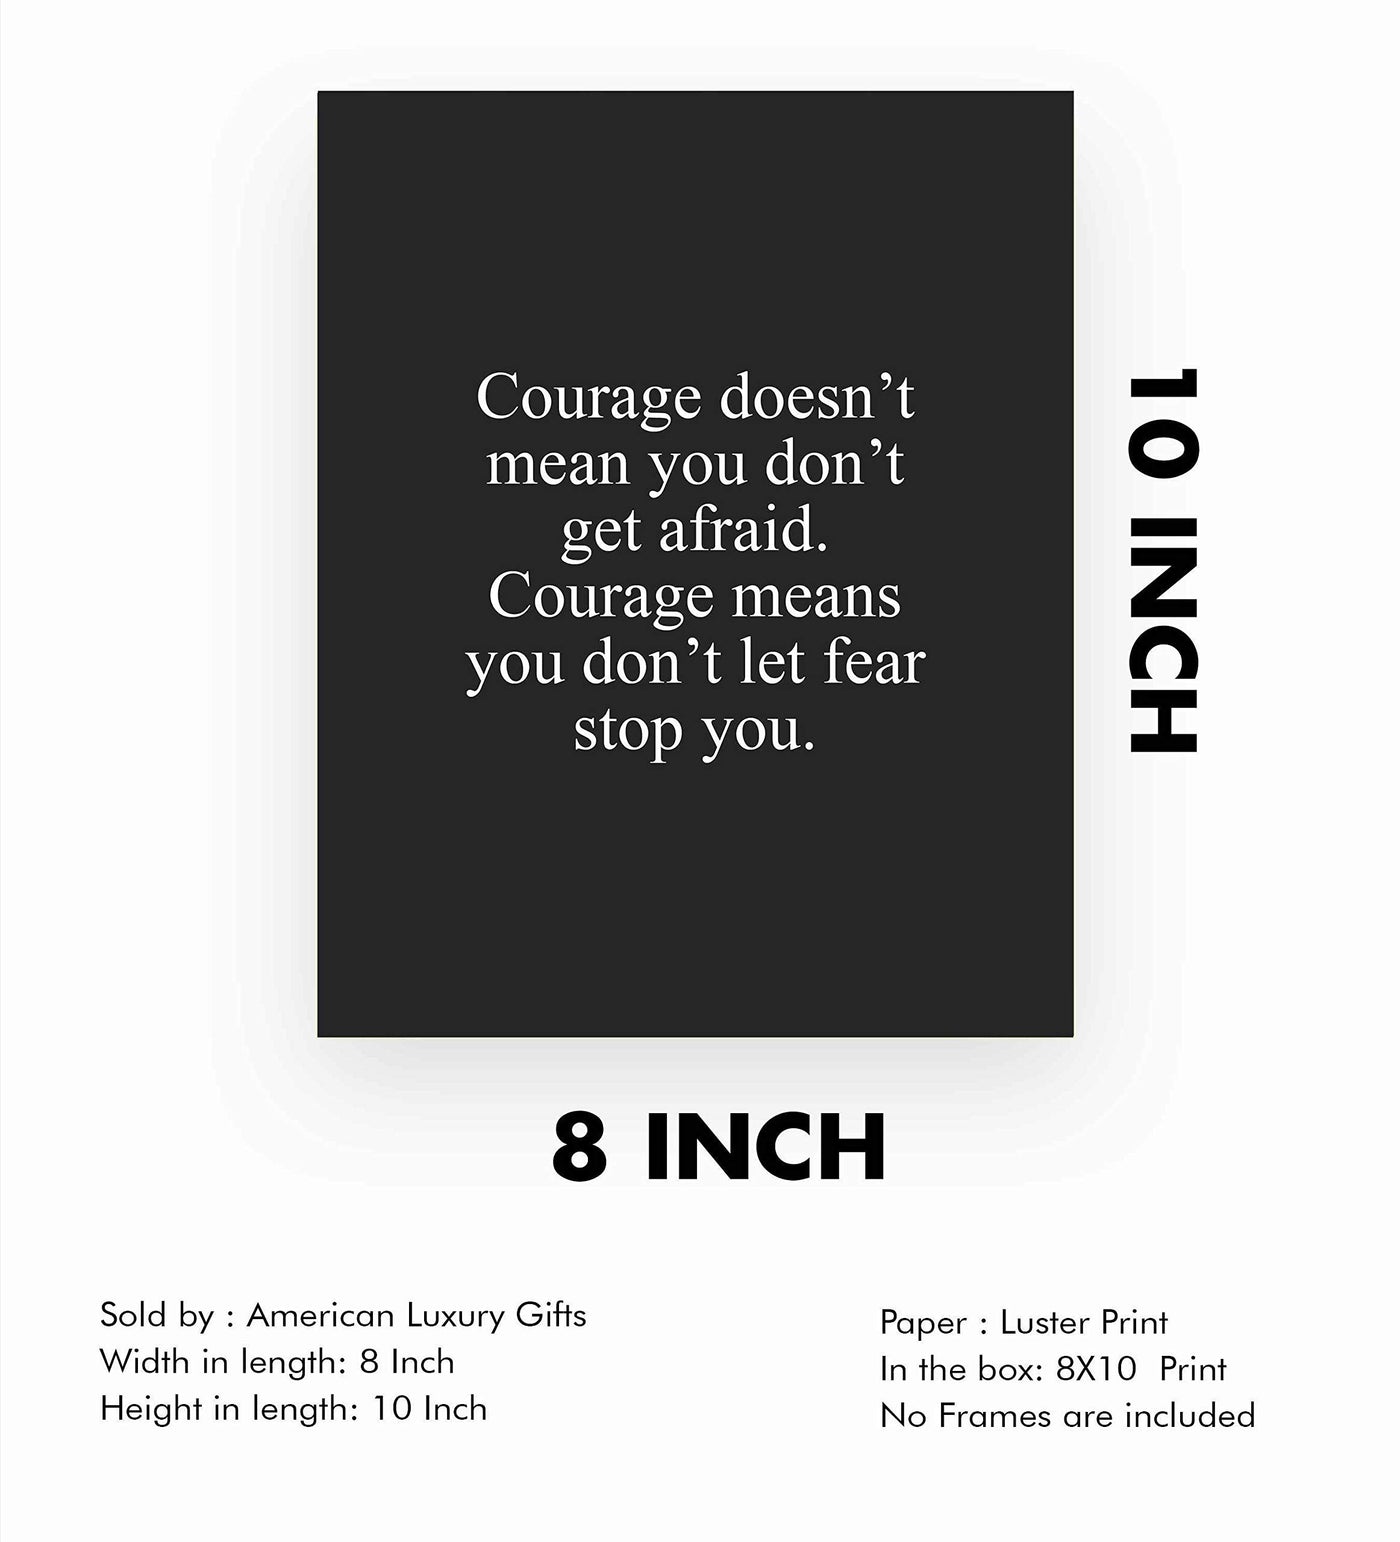 Courage Means Don't Let Fear Stop You Motivational Quotes Wall Sign -8 x 10" Typographic Art Print-Ready to Frame. Inspirational Home-Office-School-Gym-Motivation Decor. Great Advice for All!